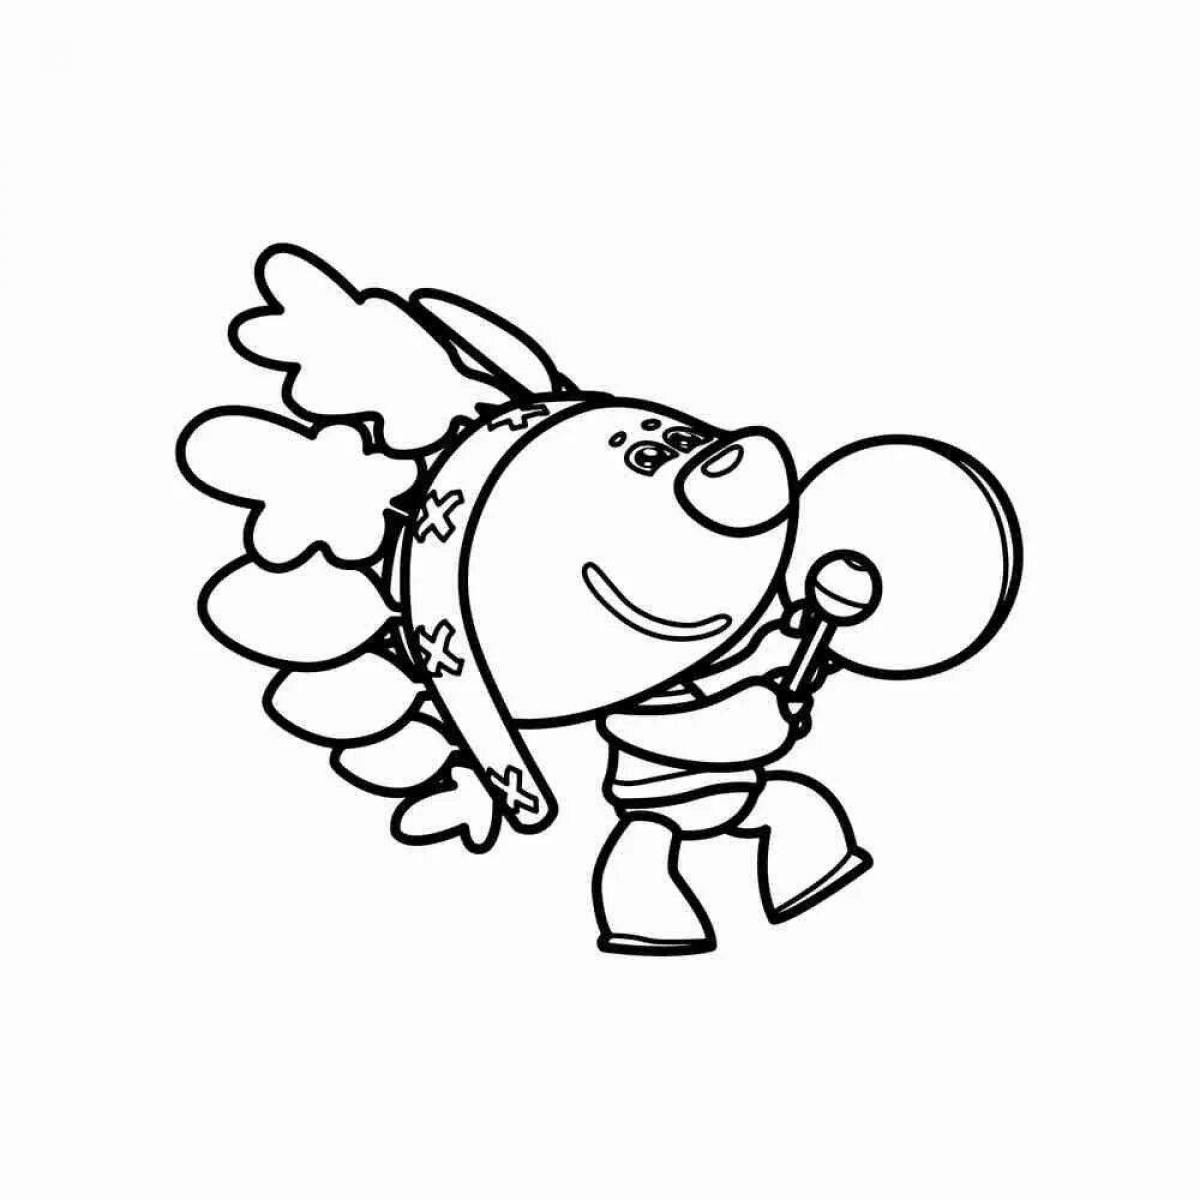 Mimimishka glowing clouds coloring page